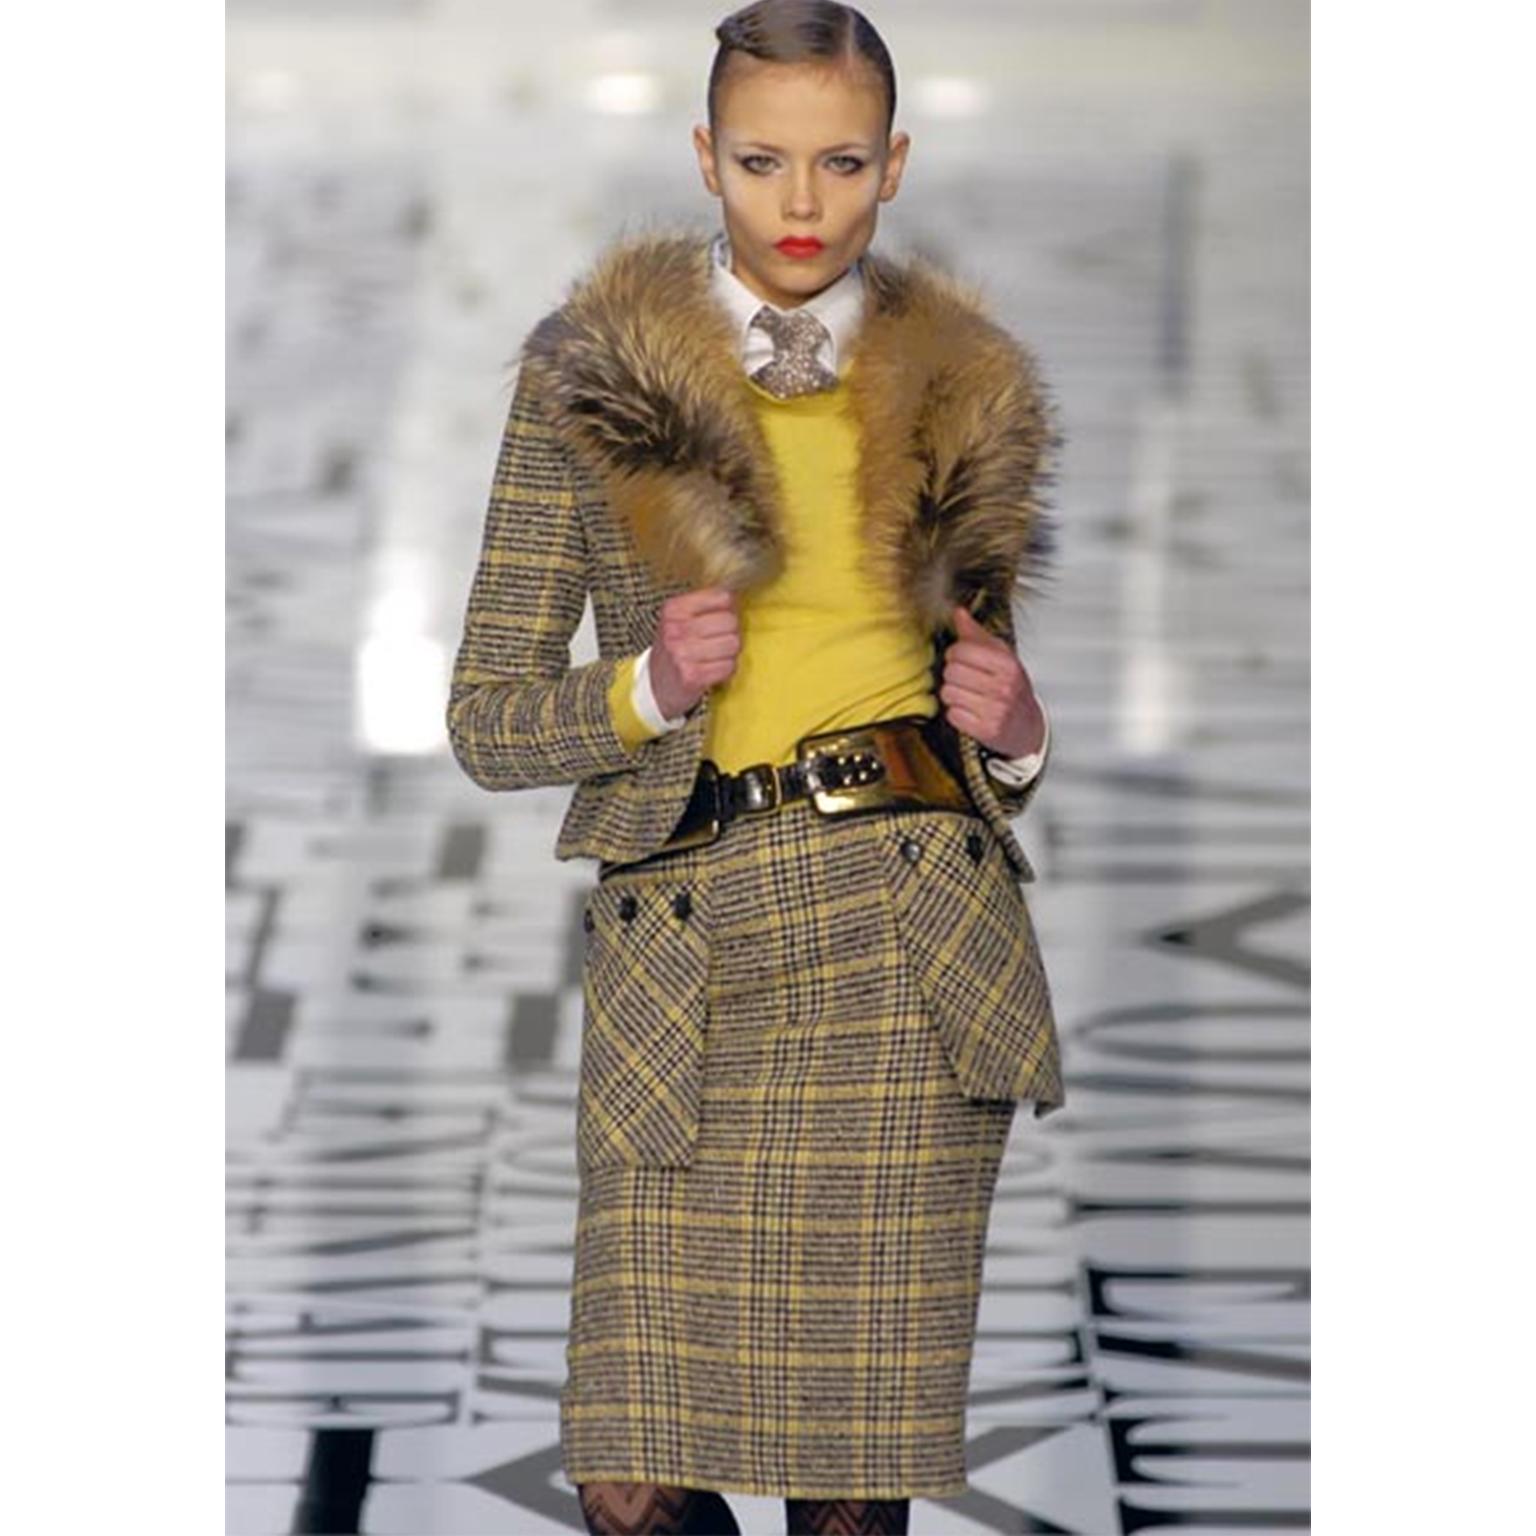 Valentino Garavani is truly unmatched in his ability to create designs that each play with color, details, and silhouettes in their own unique way, yet somehow come together to create cohesive runway collections. This Fall 2004 Skirt and Jacket was